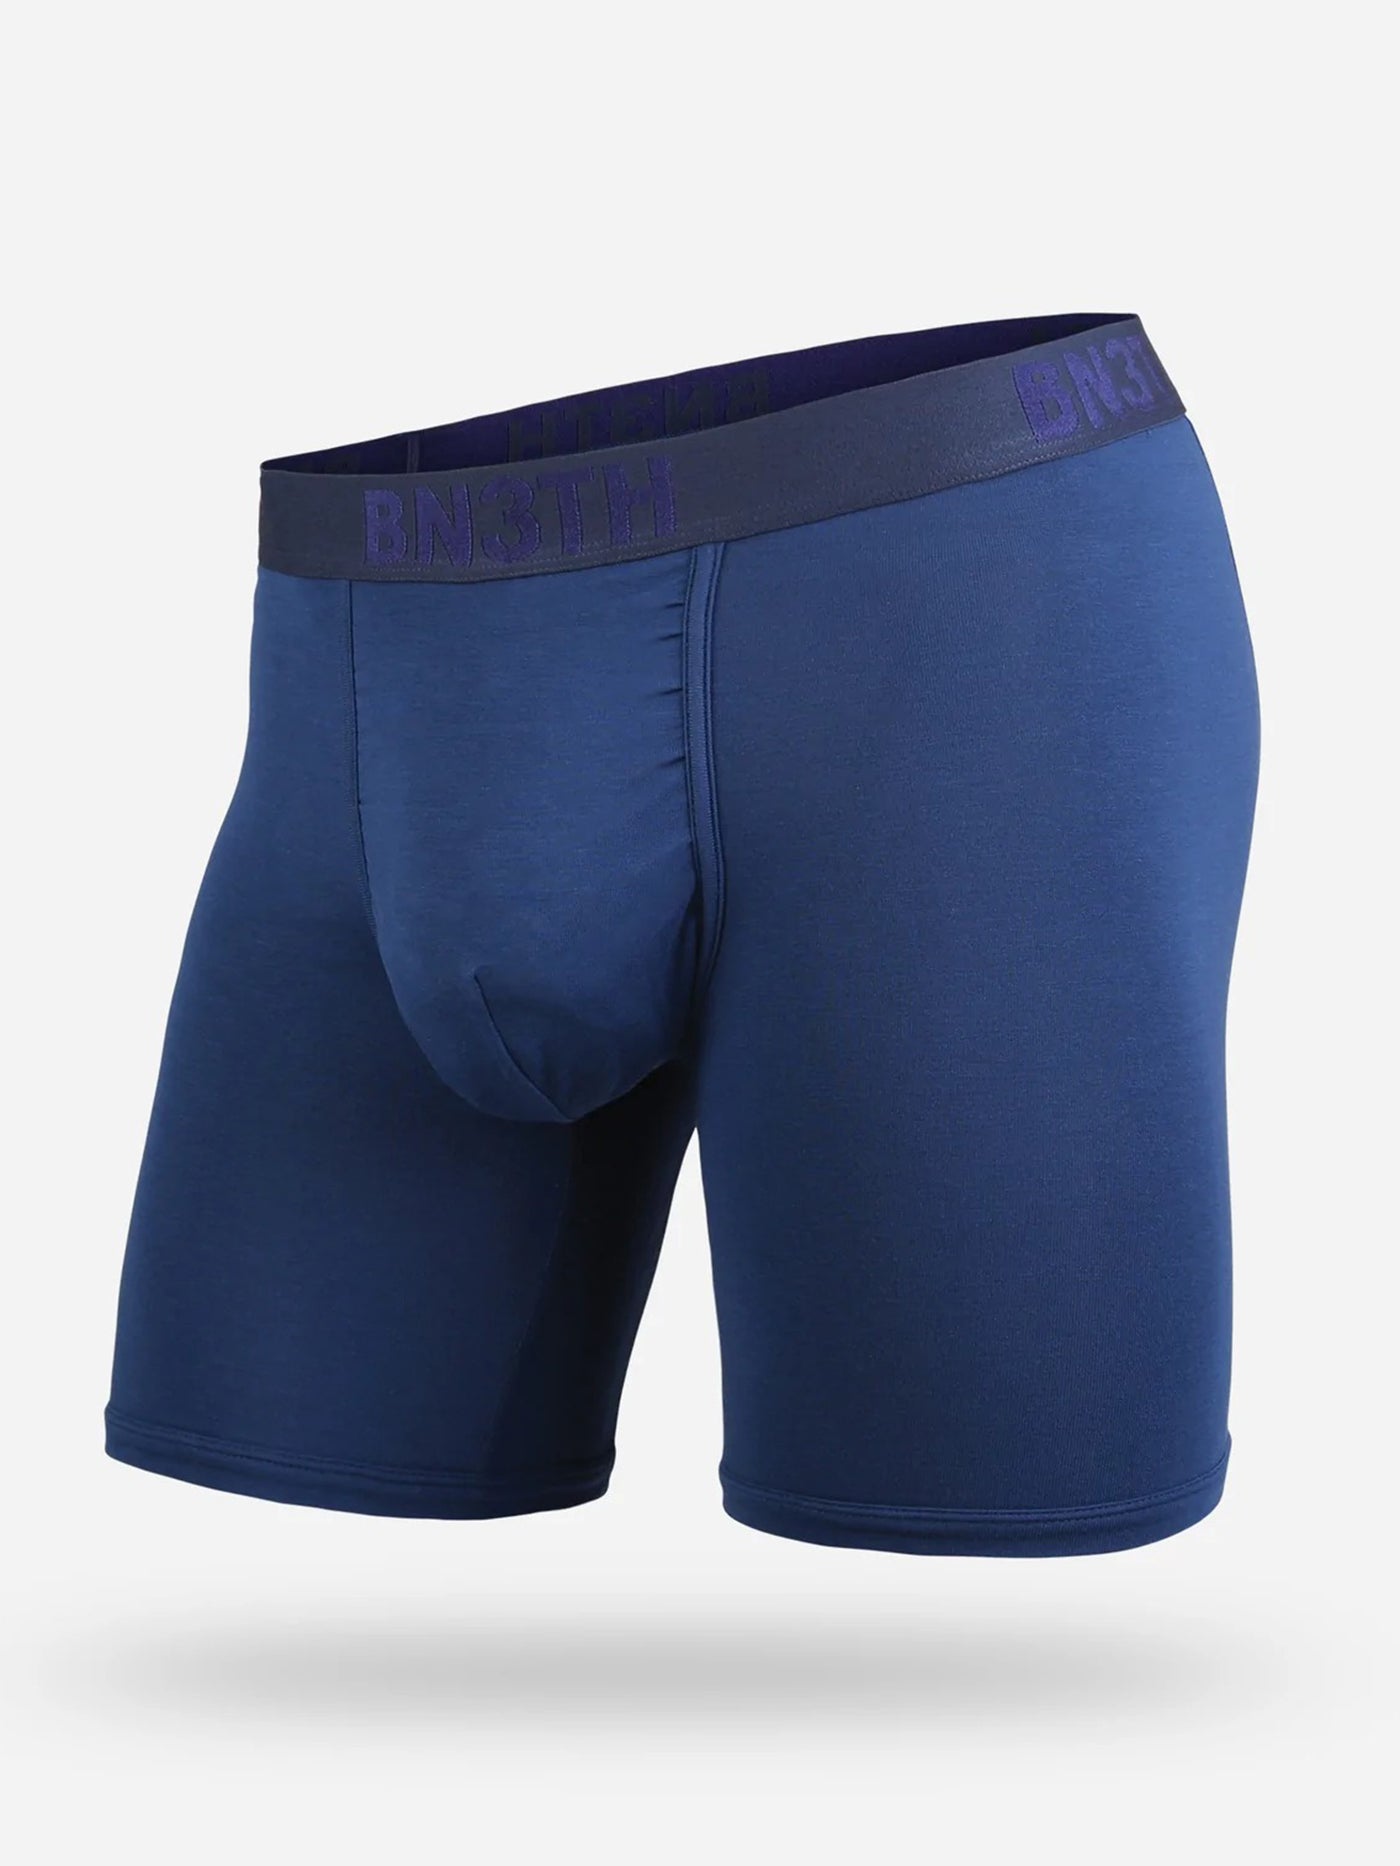 Bn3th Classic Brief Solid Navy Boxer